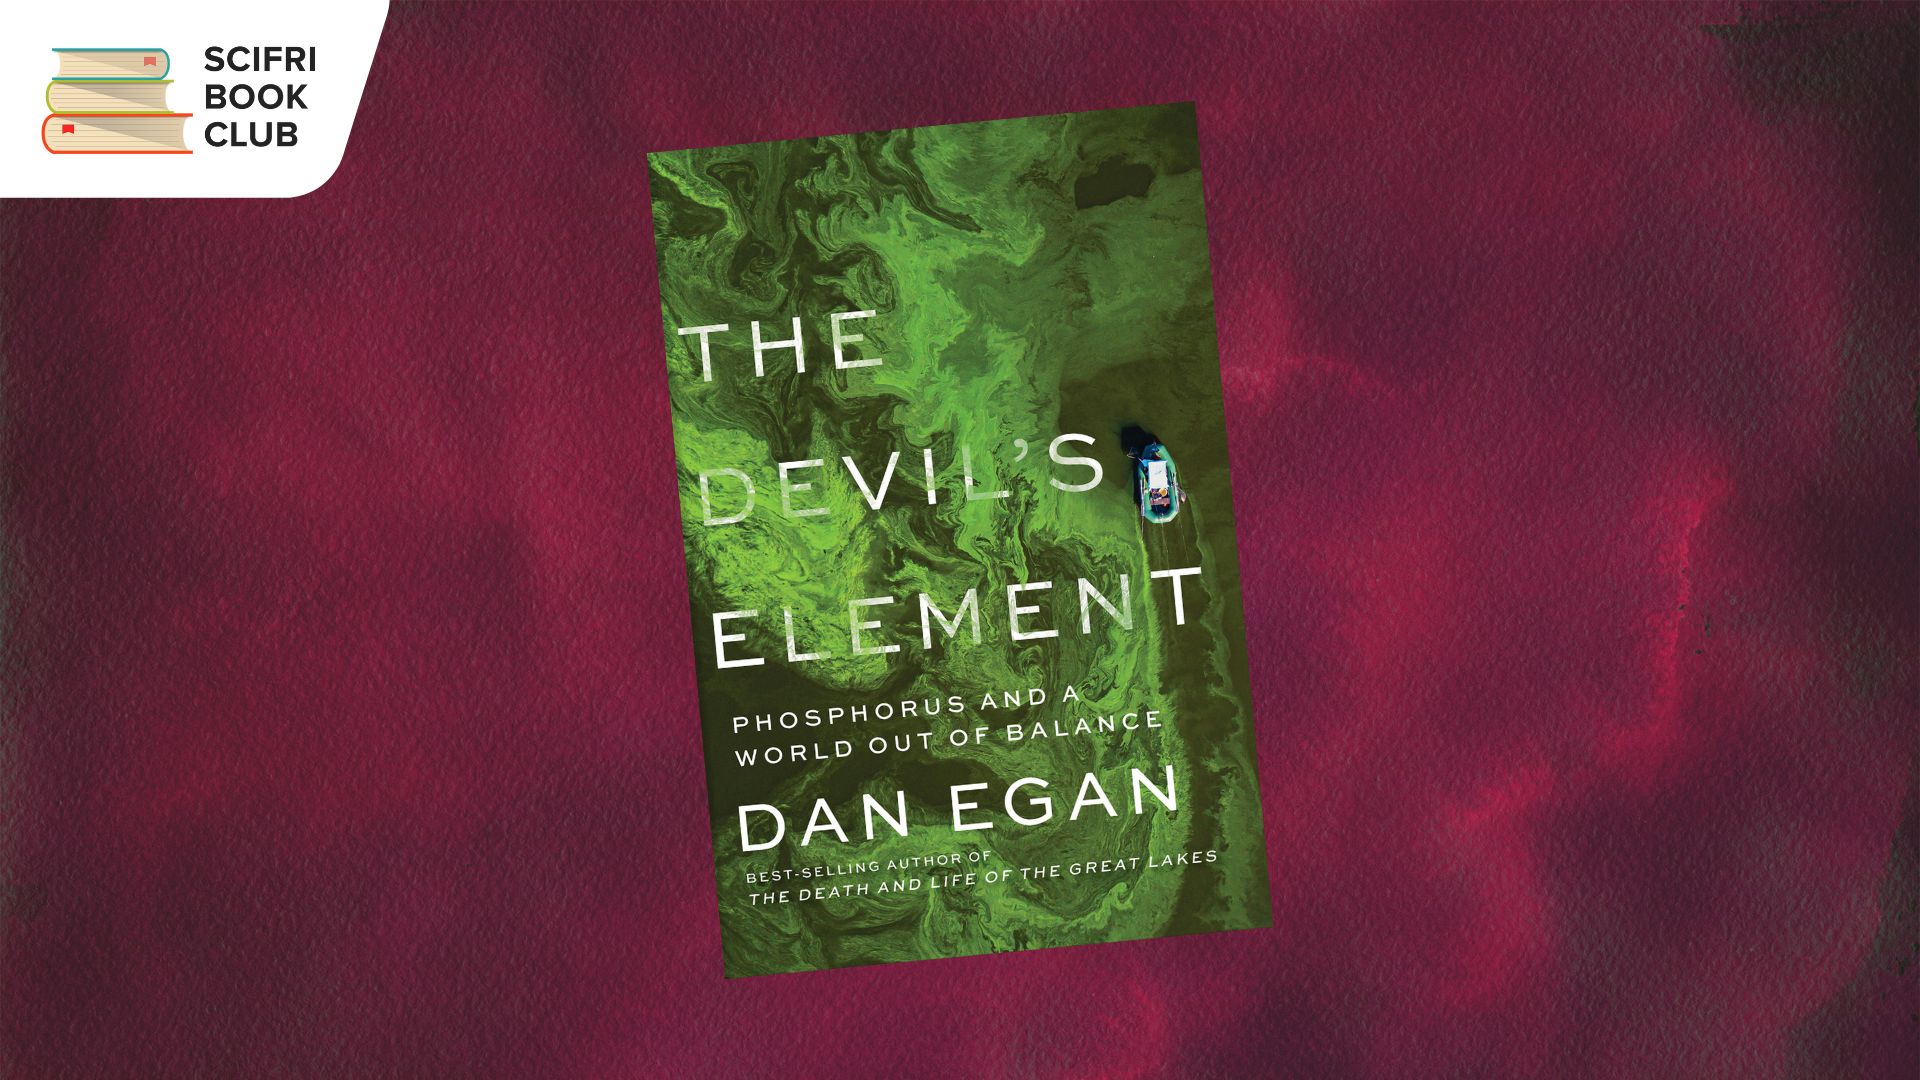 The cover of THE DEVIL'S ELEMENT by Dan Egan with a background featuring featuring maroon watercolor paper texture.